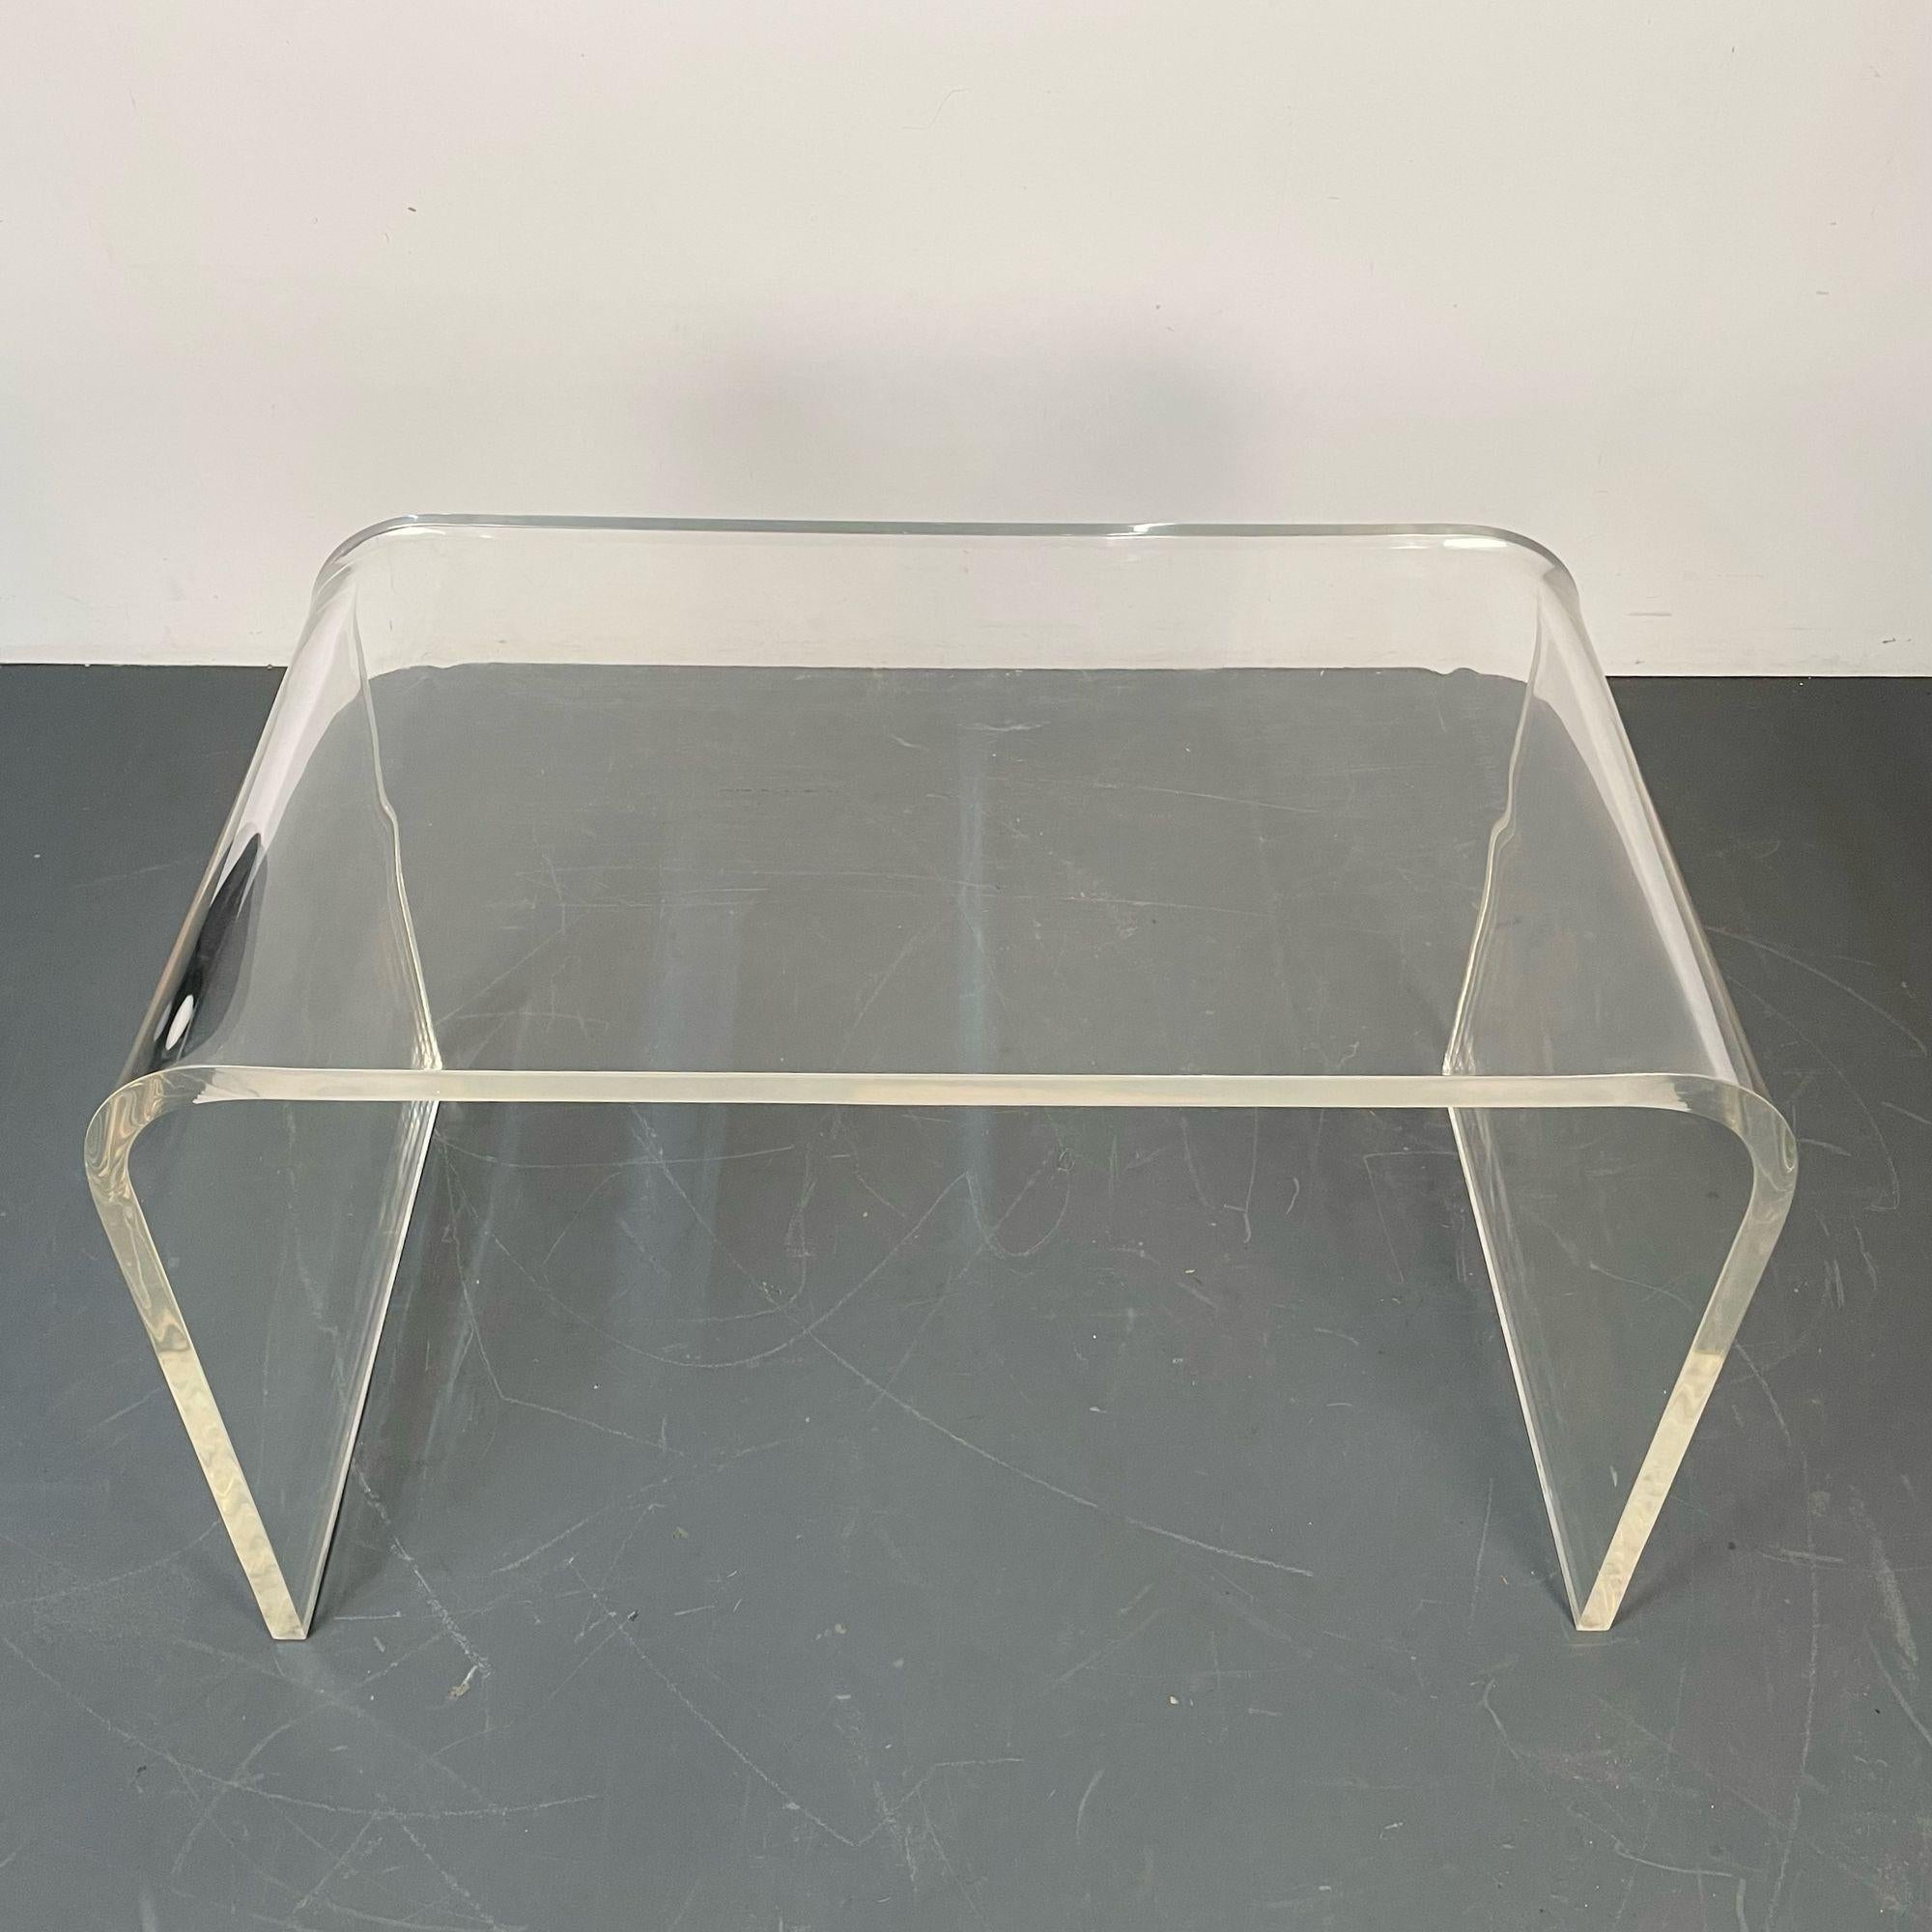 20th Century Mid-Century Modern Lucite Waterfall Console / Writing Table or Desk For Sale